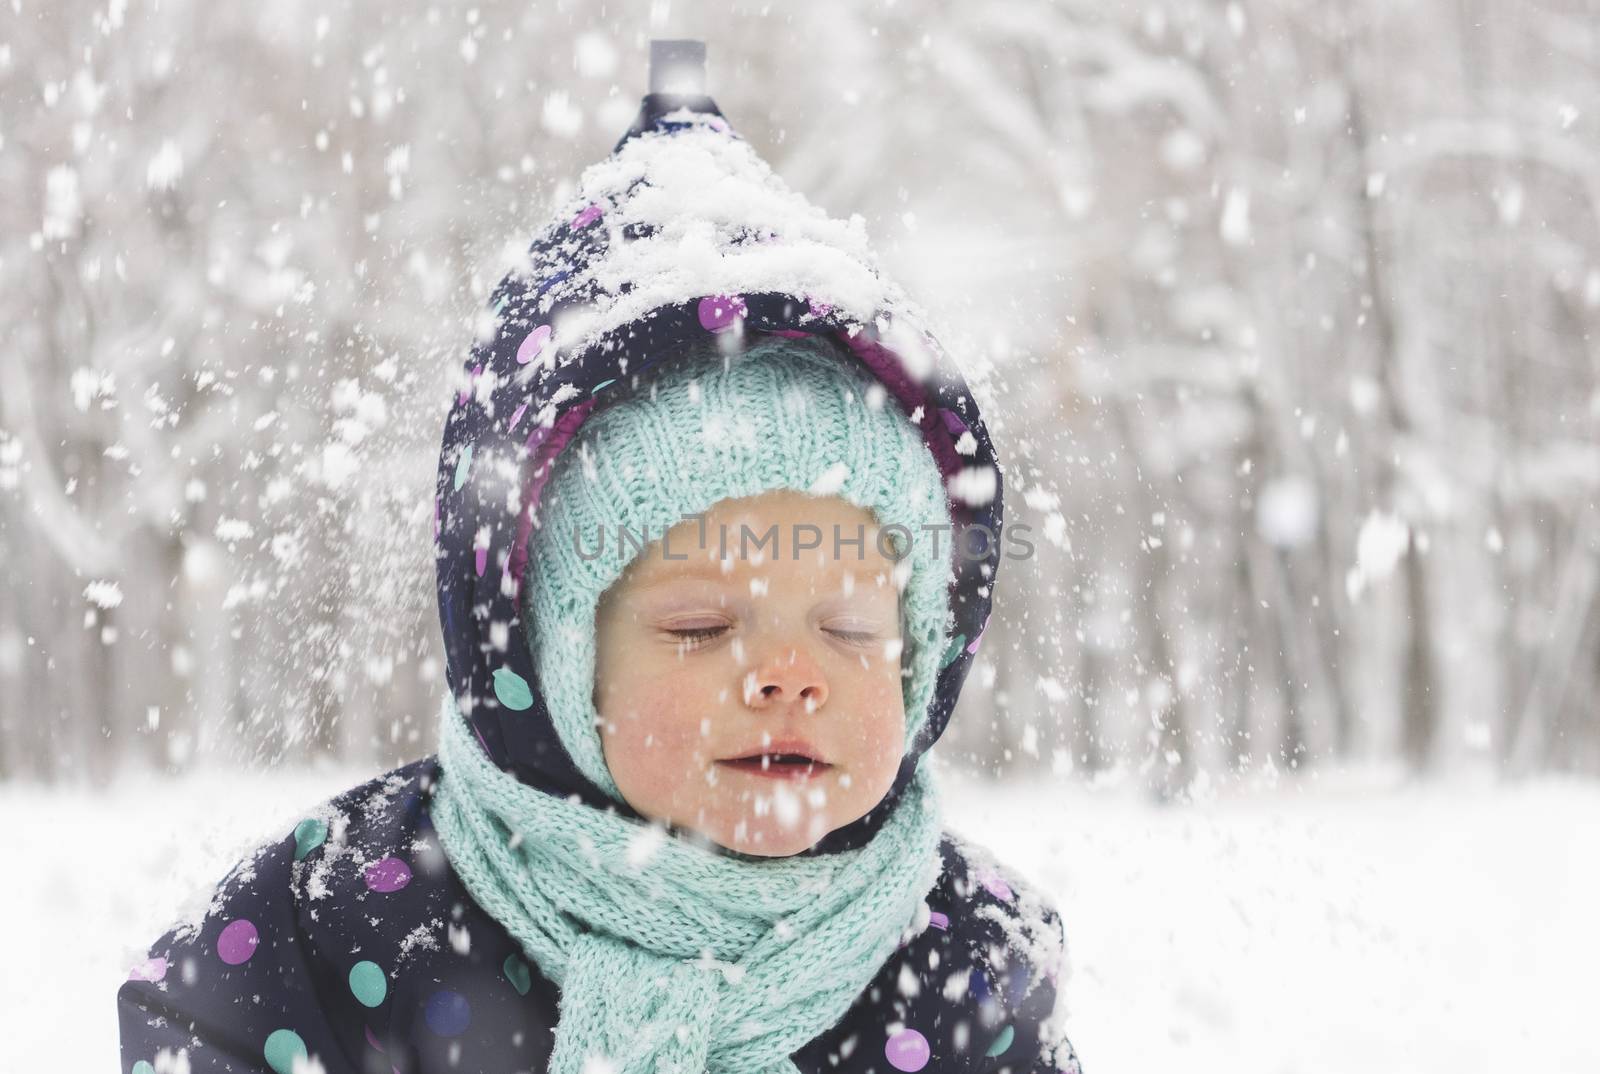 Baby in a winter jumpsuit rejoices in the first snow